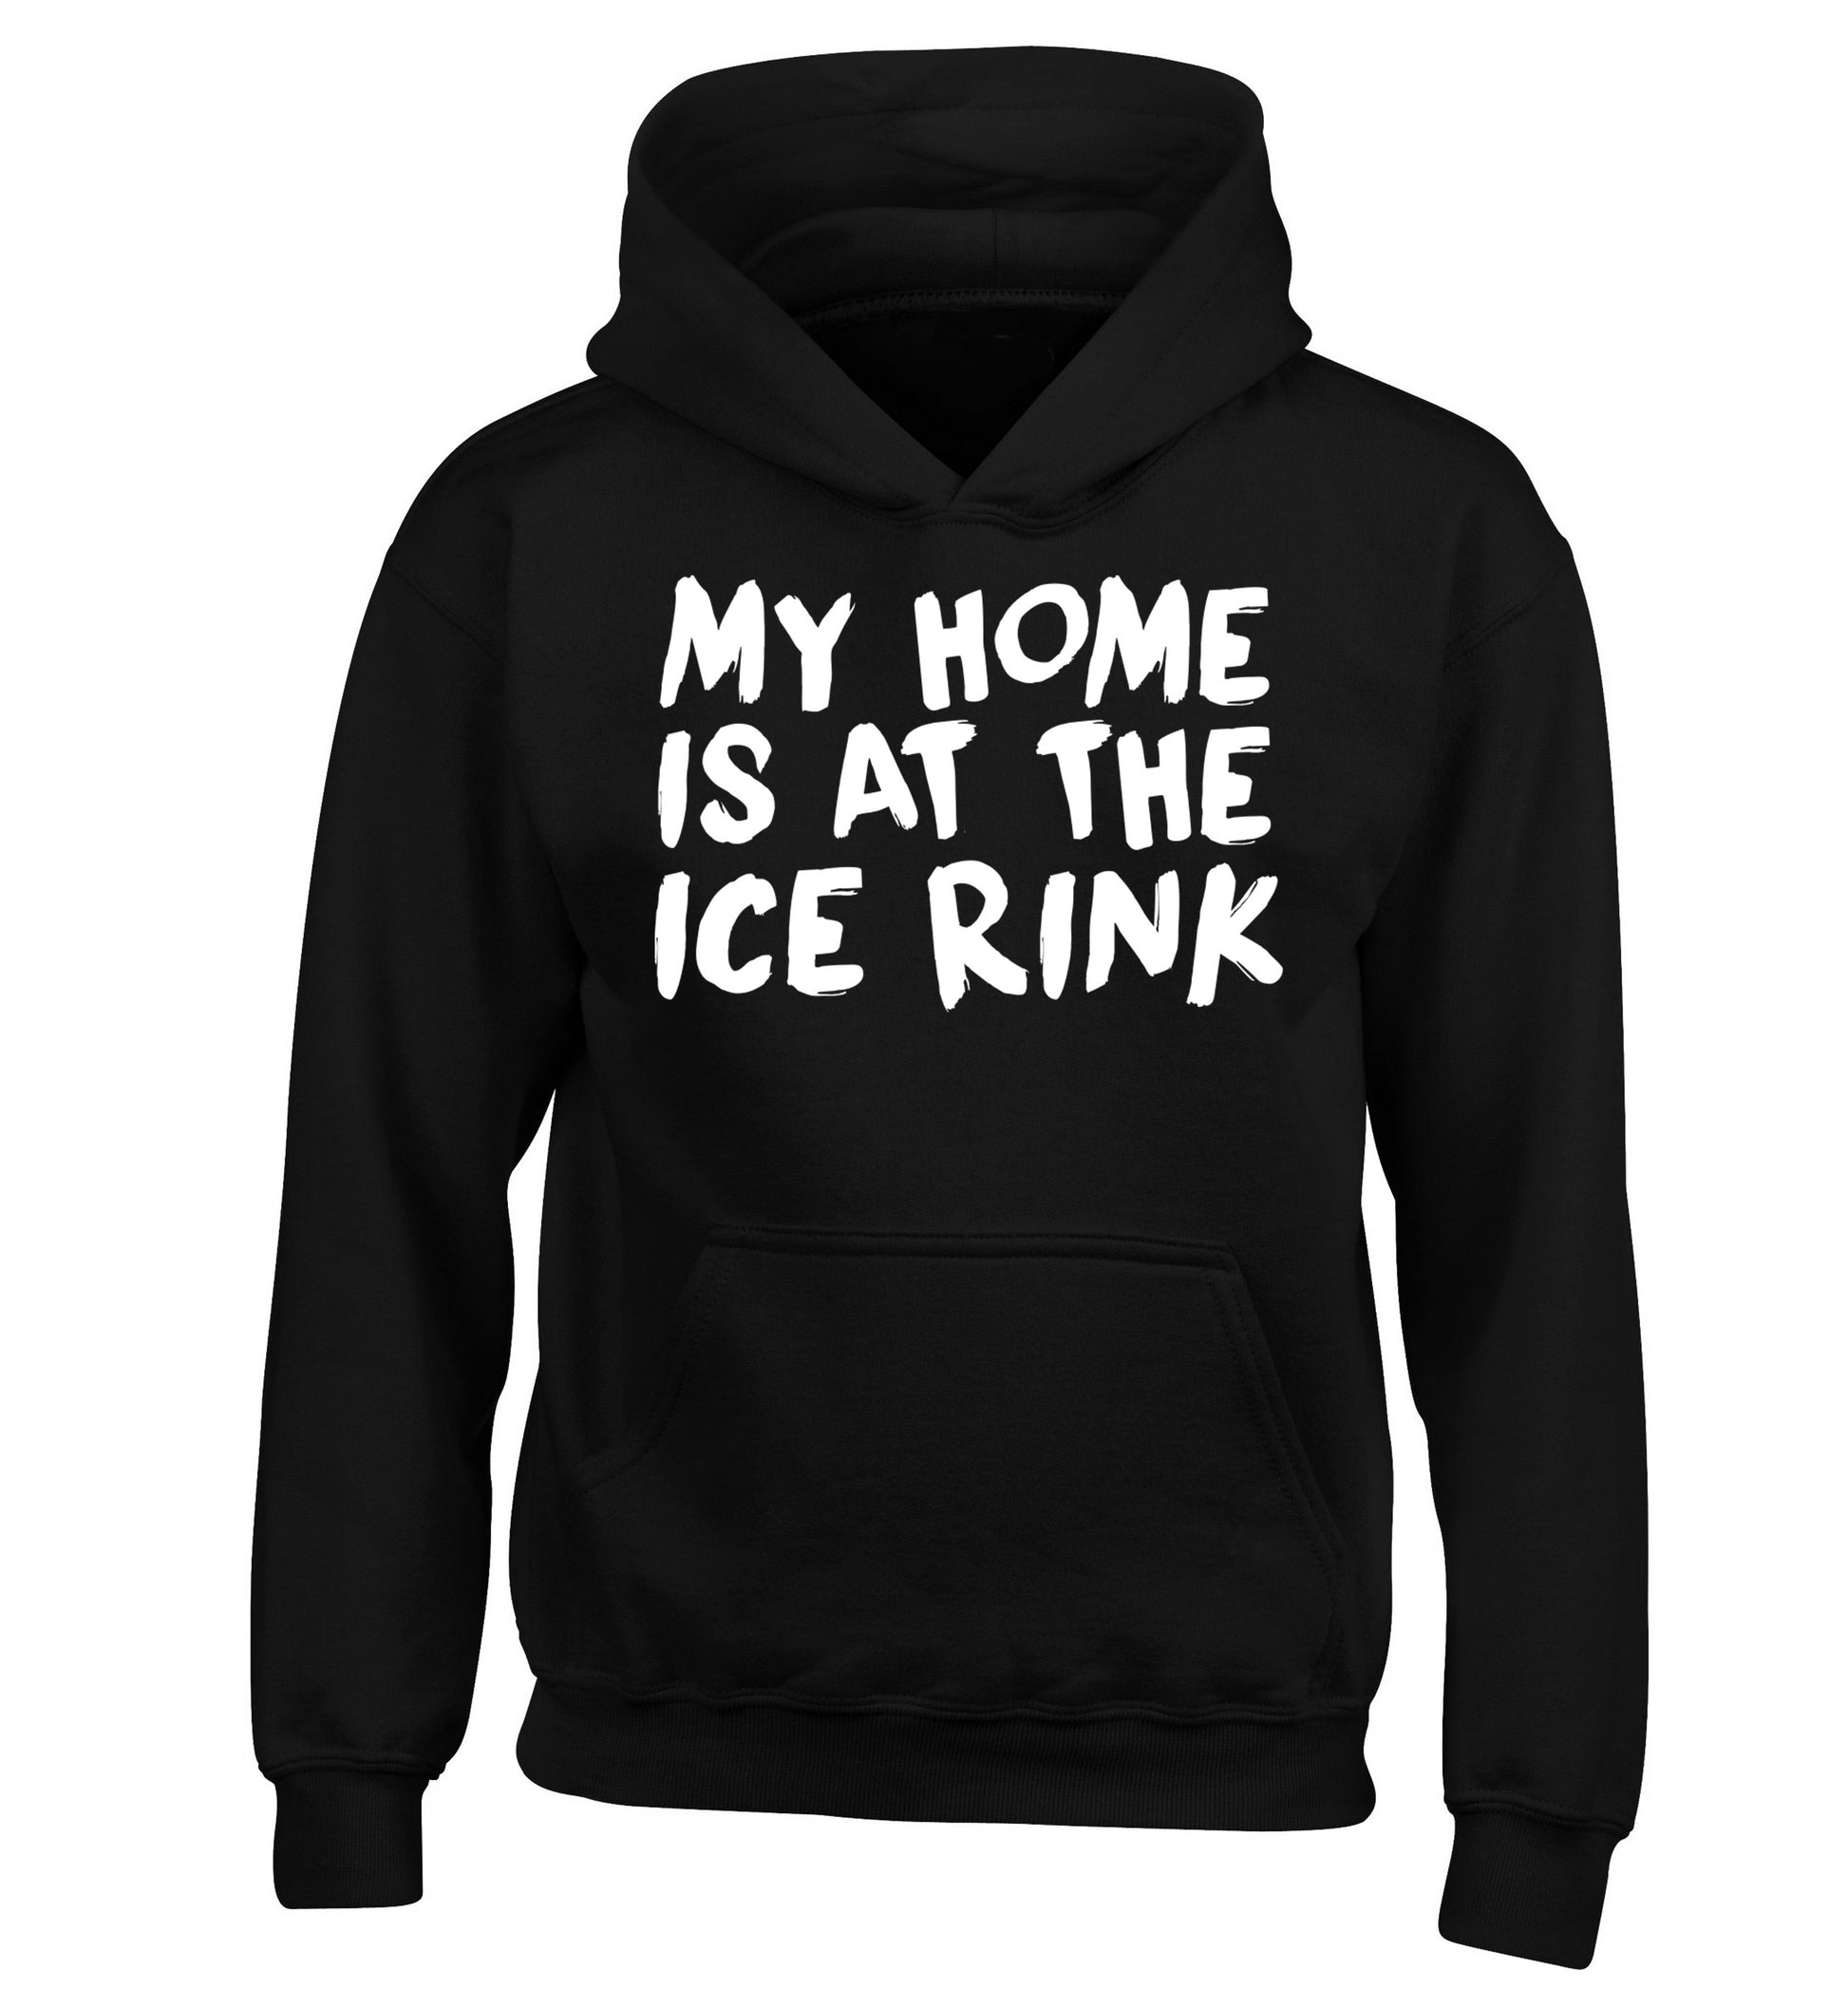 My home is at the ice rink children's black hoodie 12-14 Years